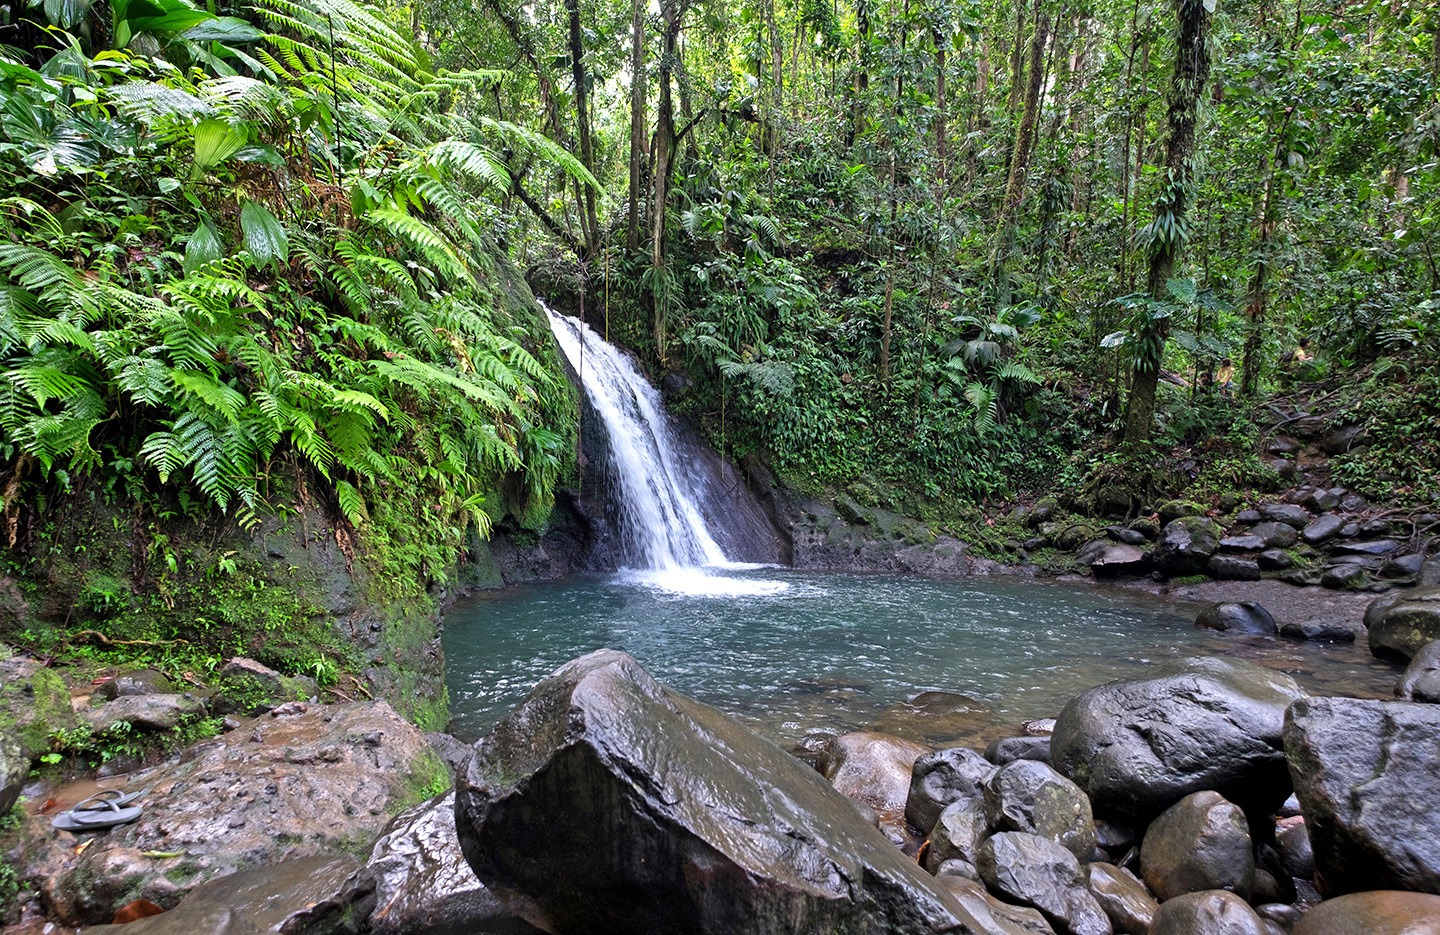 The Cascade aux Ecrevisses waterfall in Basse-Terre, Guadeloupe